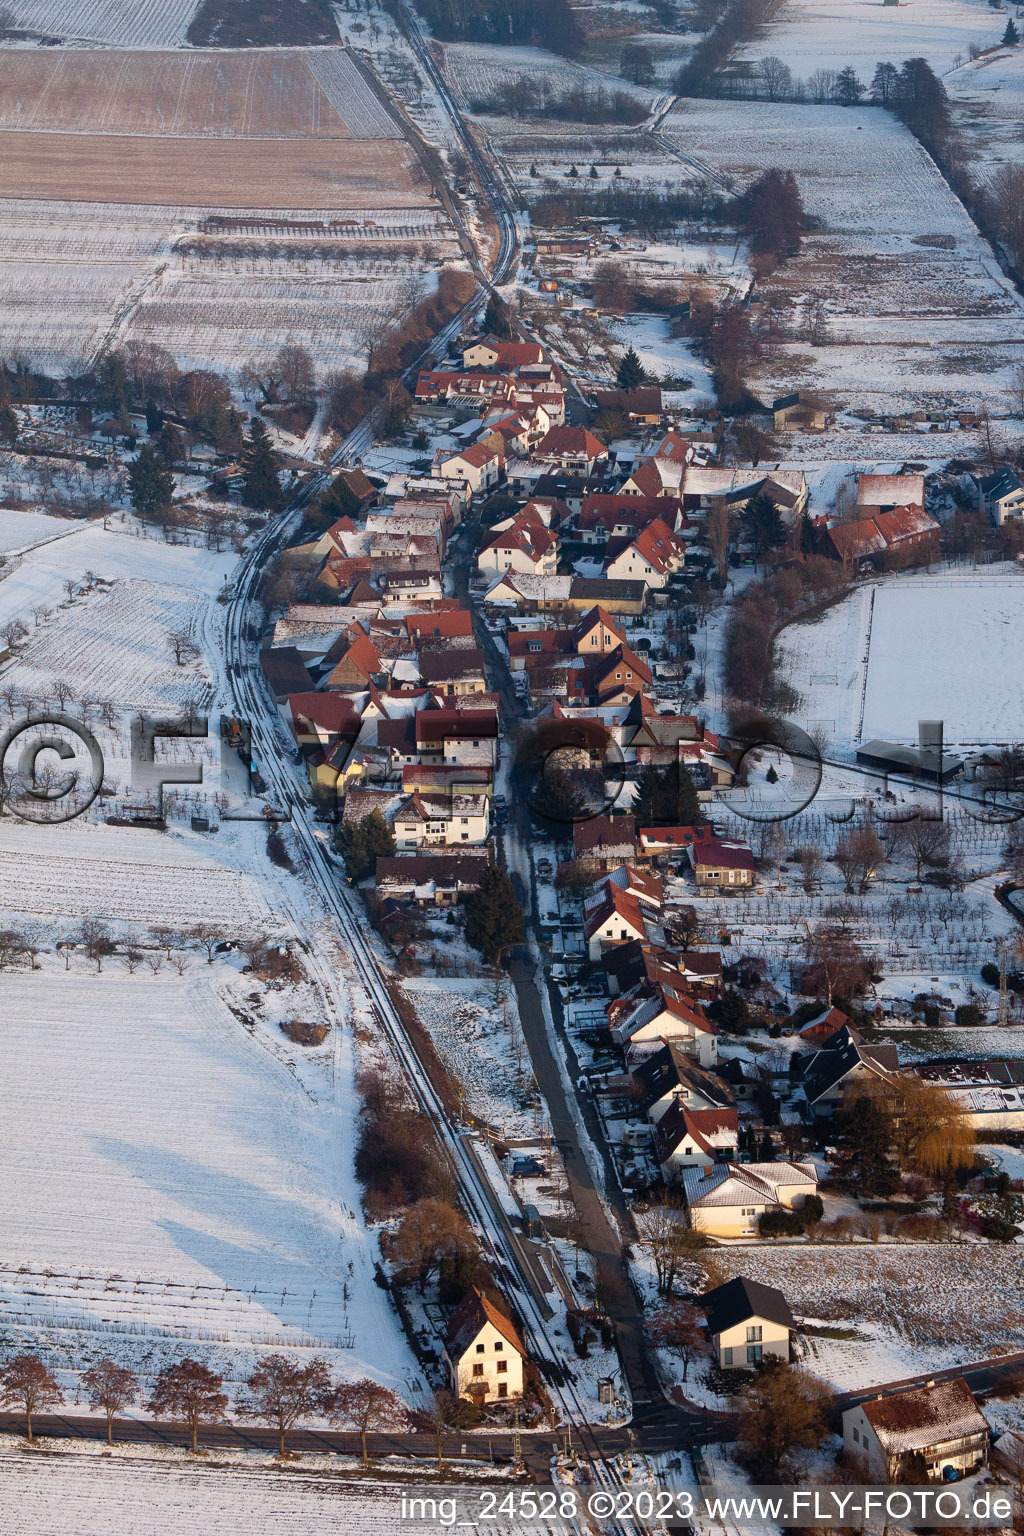 Aerial photograpy of In winter in the district Drusweiler in Kapellen-Drusweiler in the state Rhineland-Palatinate, Germany